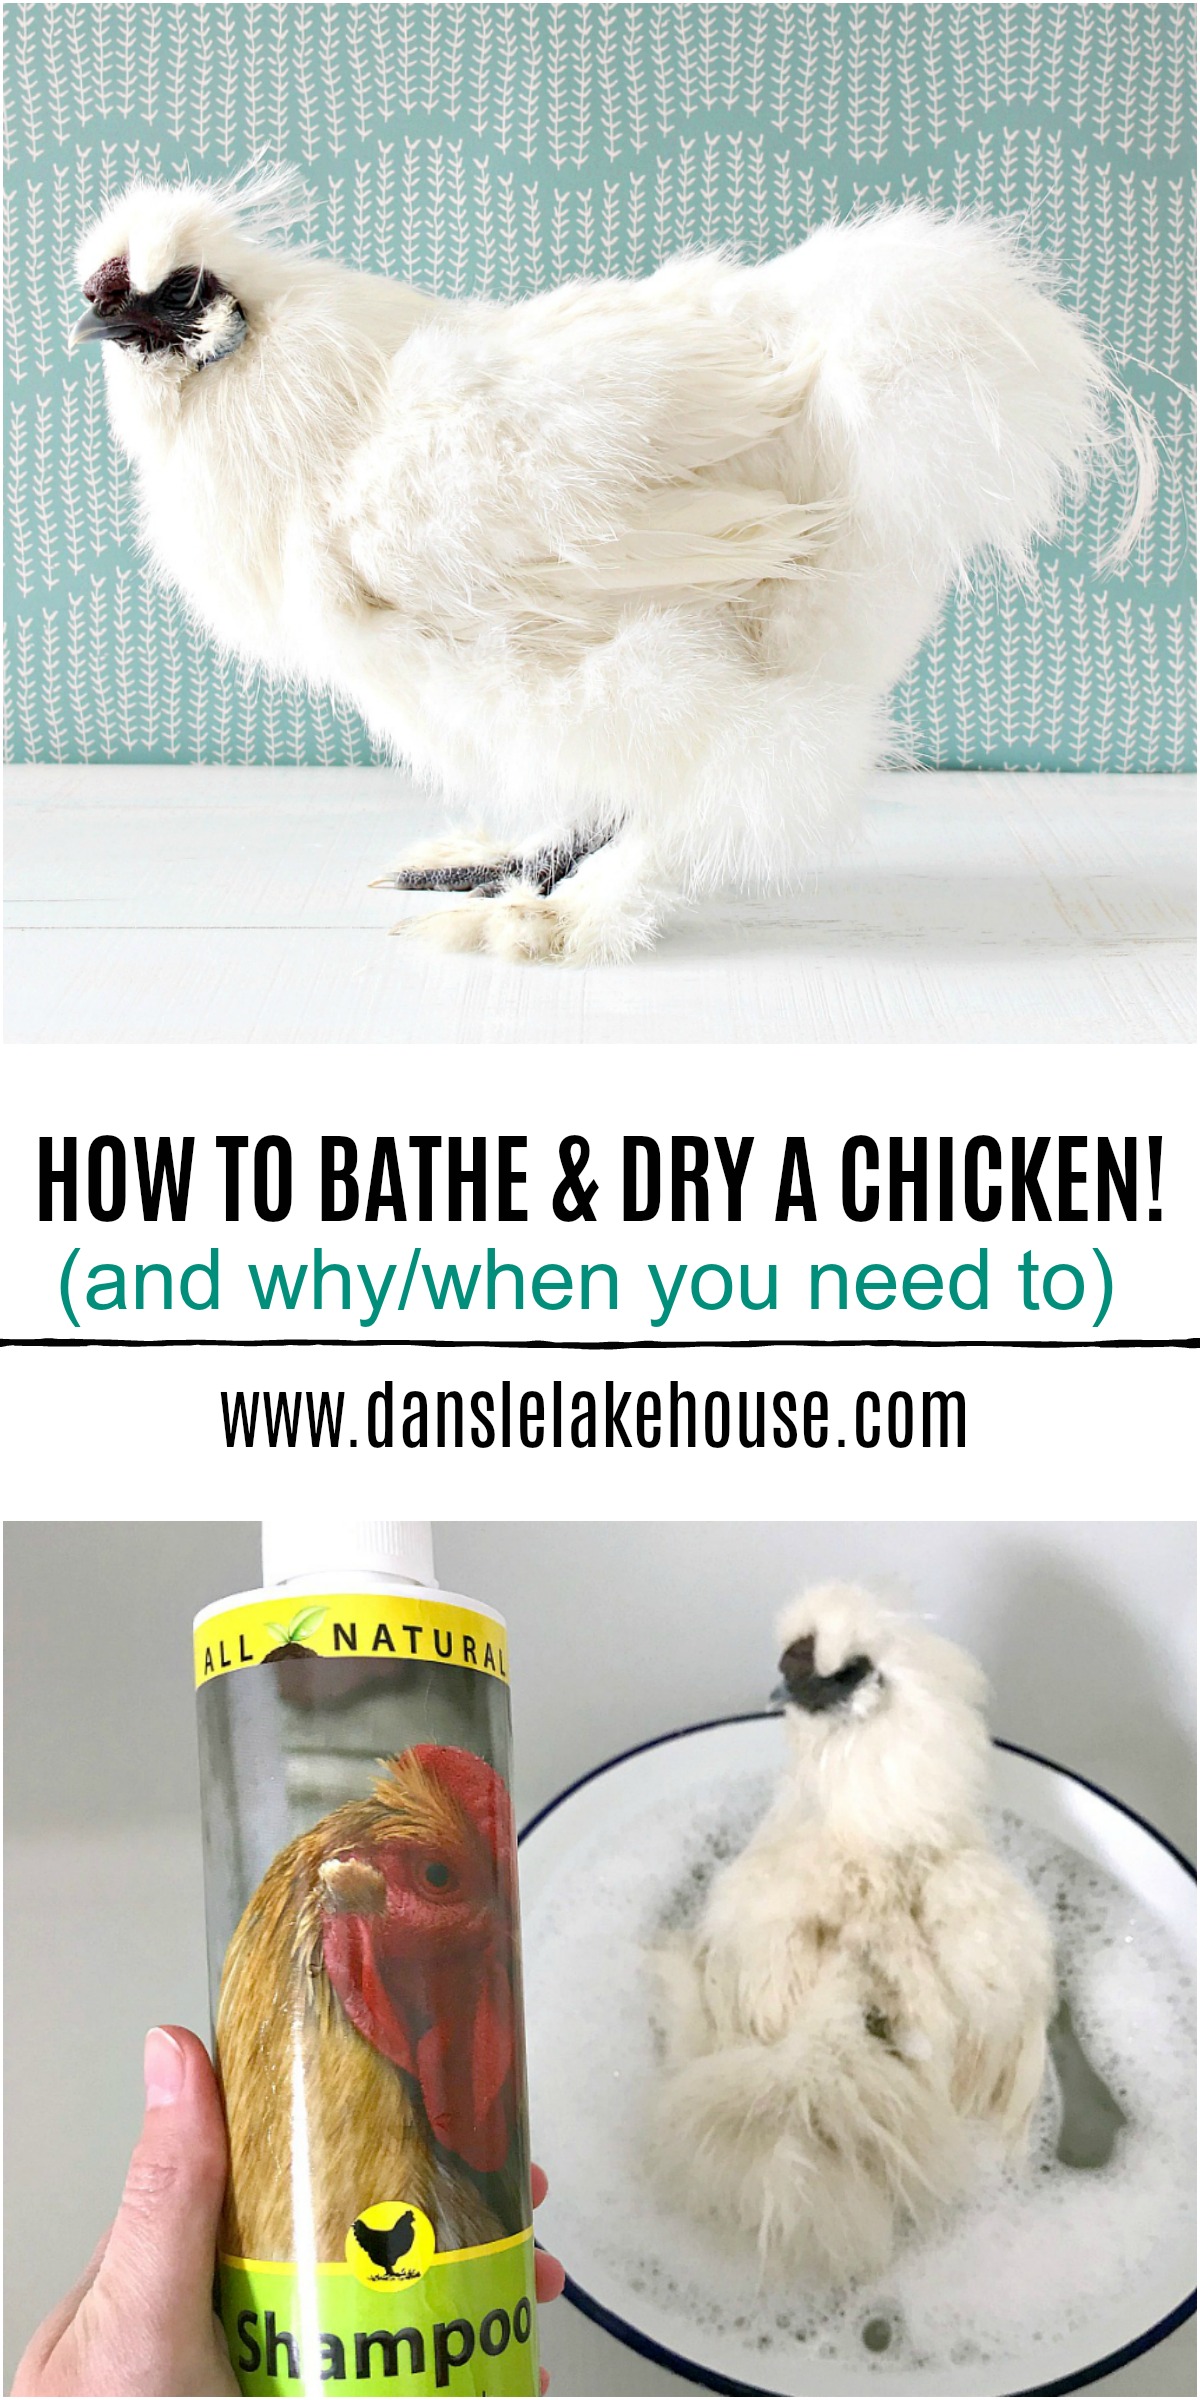 How to Bathe and Dry a Chicken and Why/When You Need to Wash a Chicken